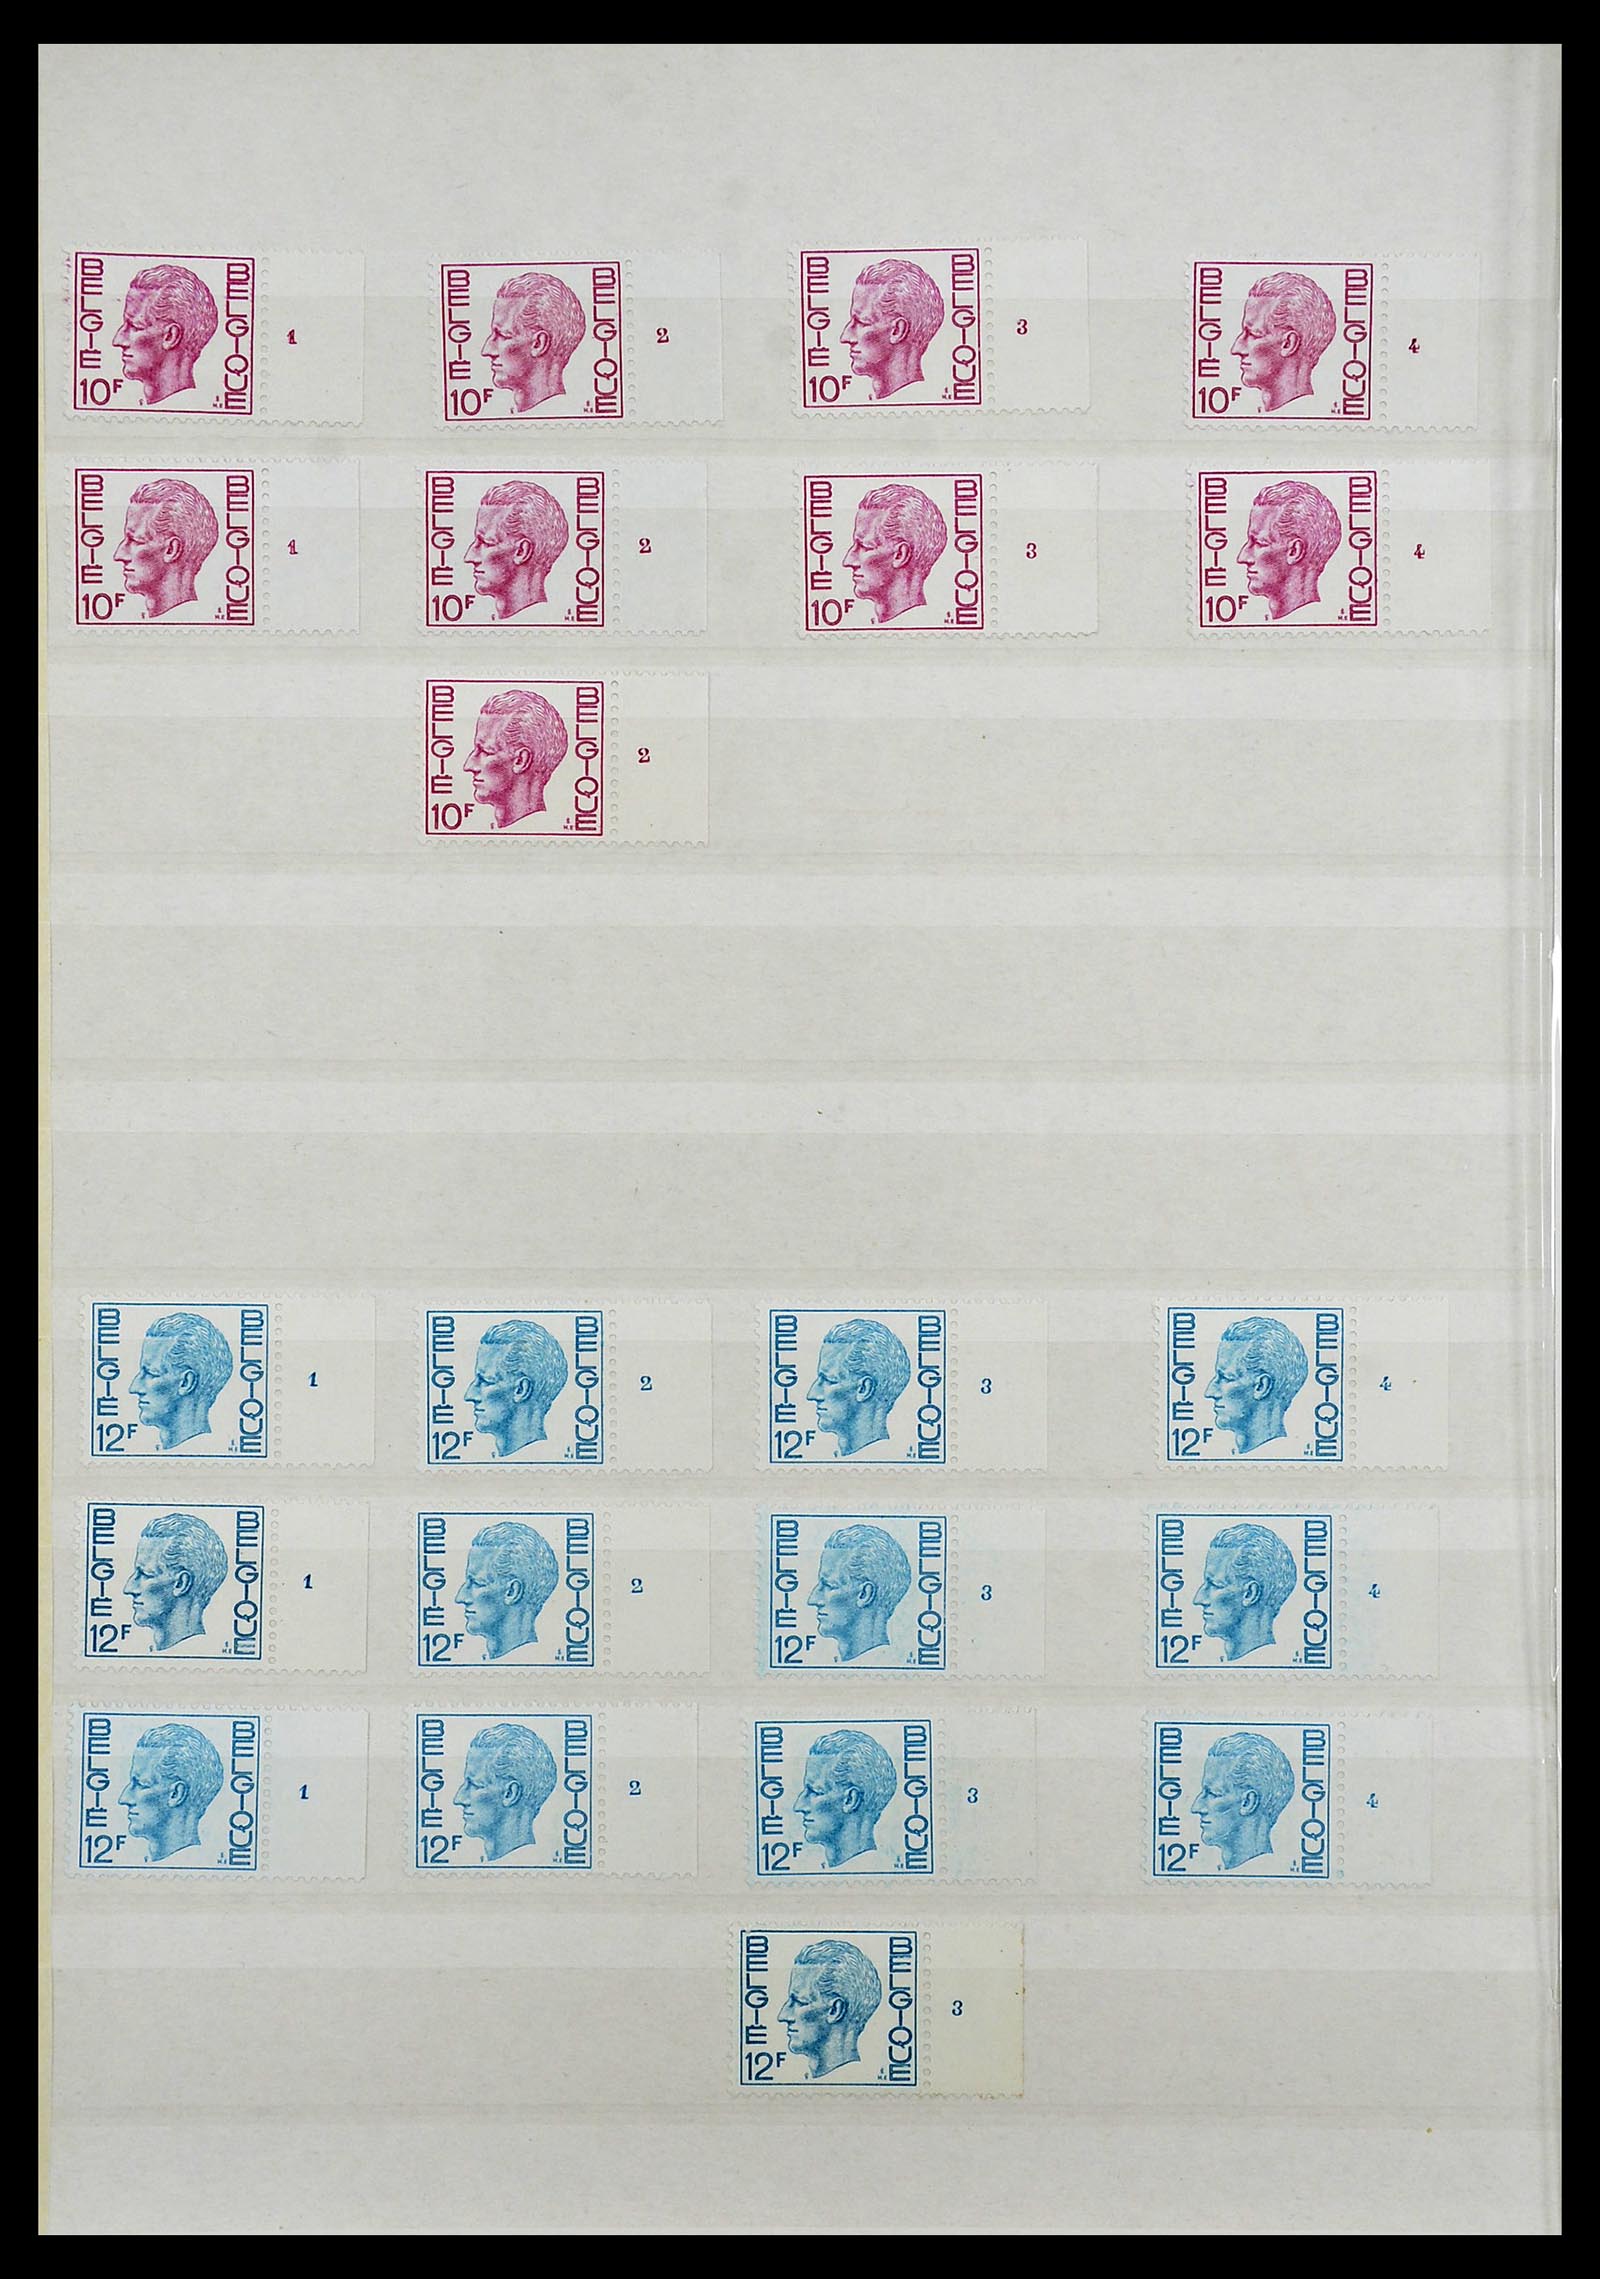 34524 096 - Stamp Collection 34524 Belgium plate and etching numbers 1963-1990.